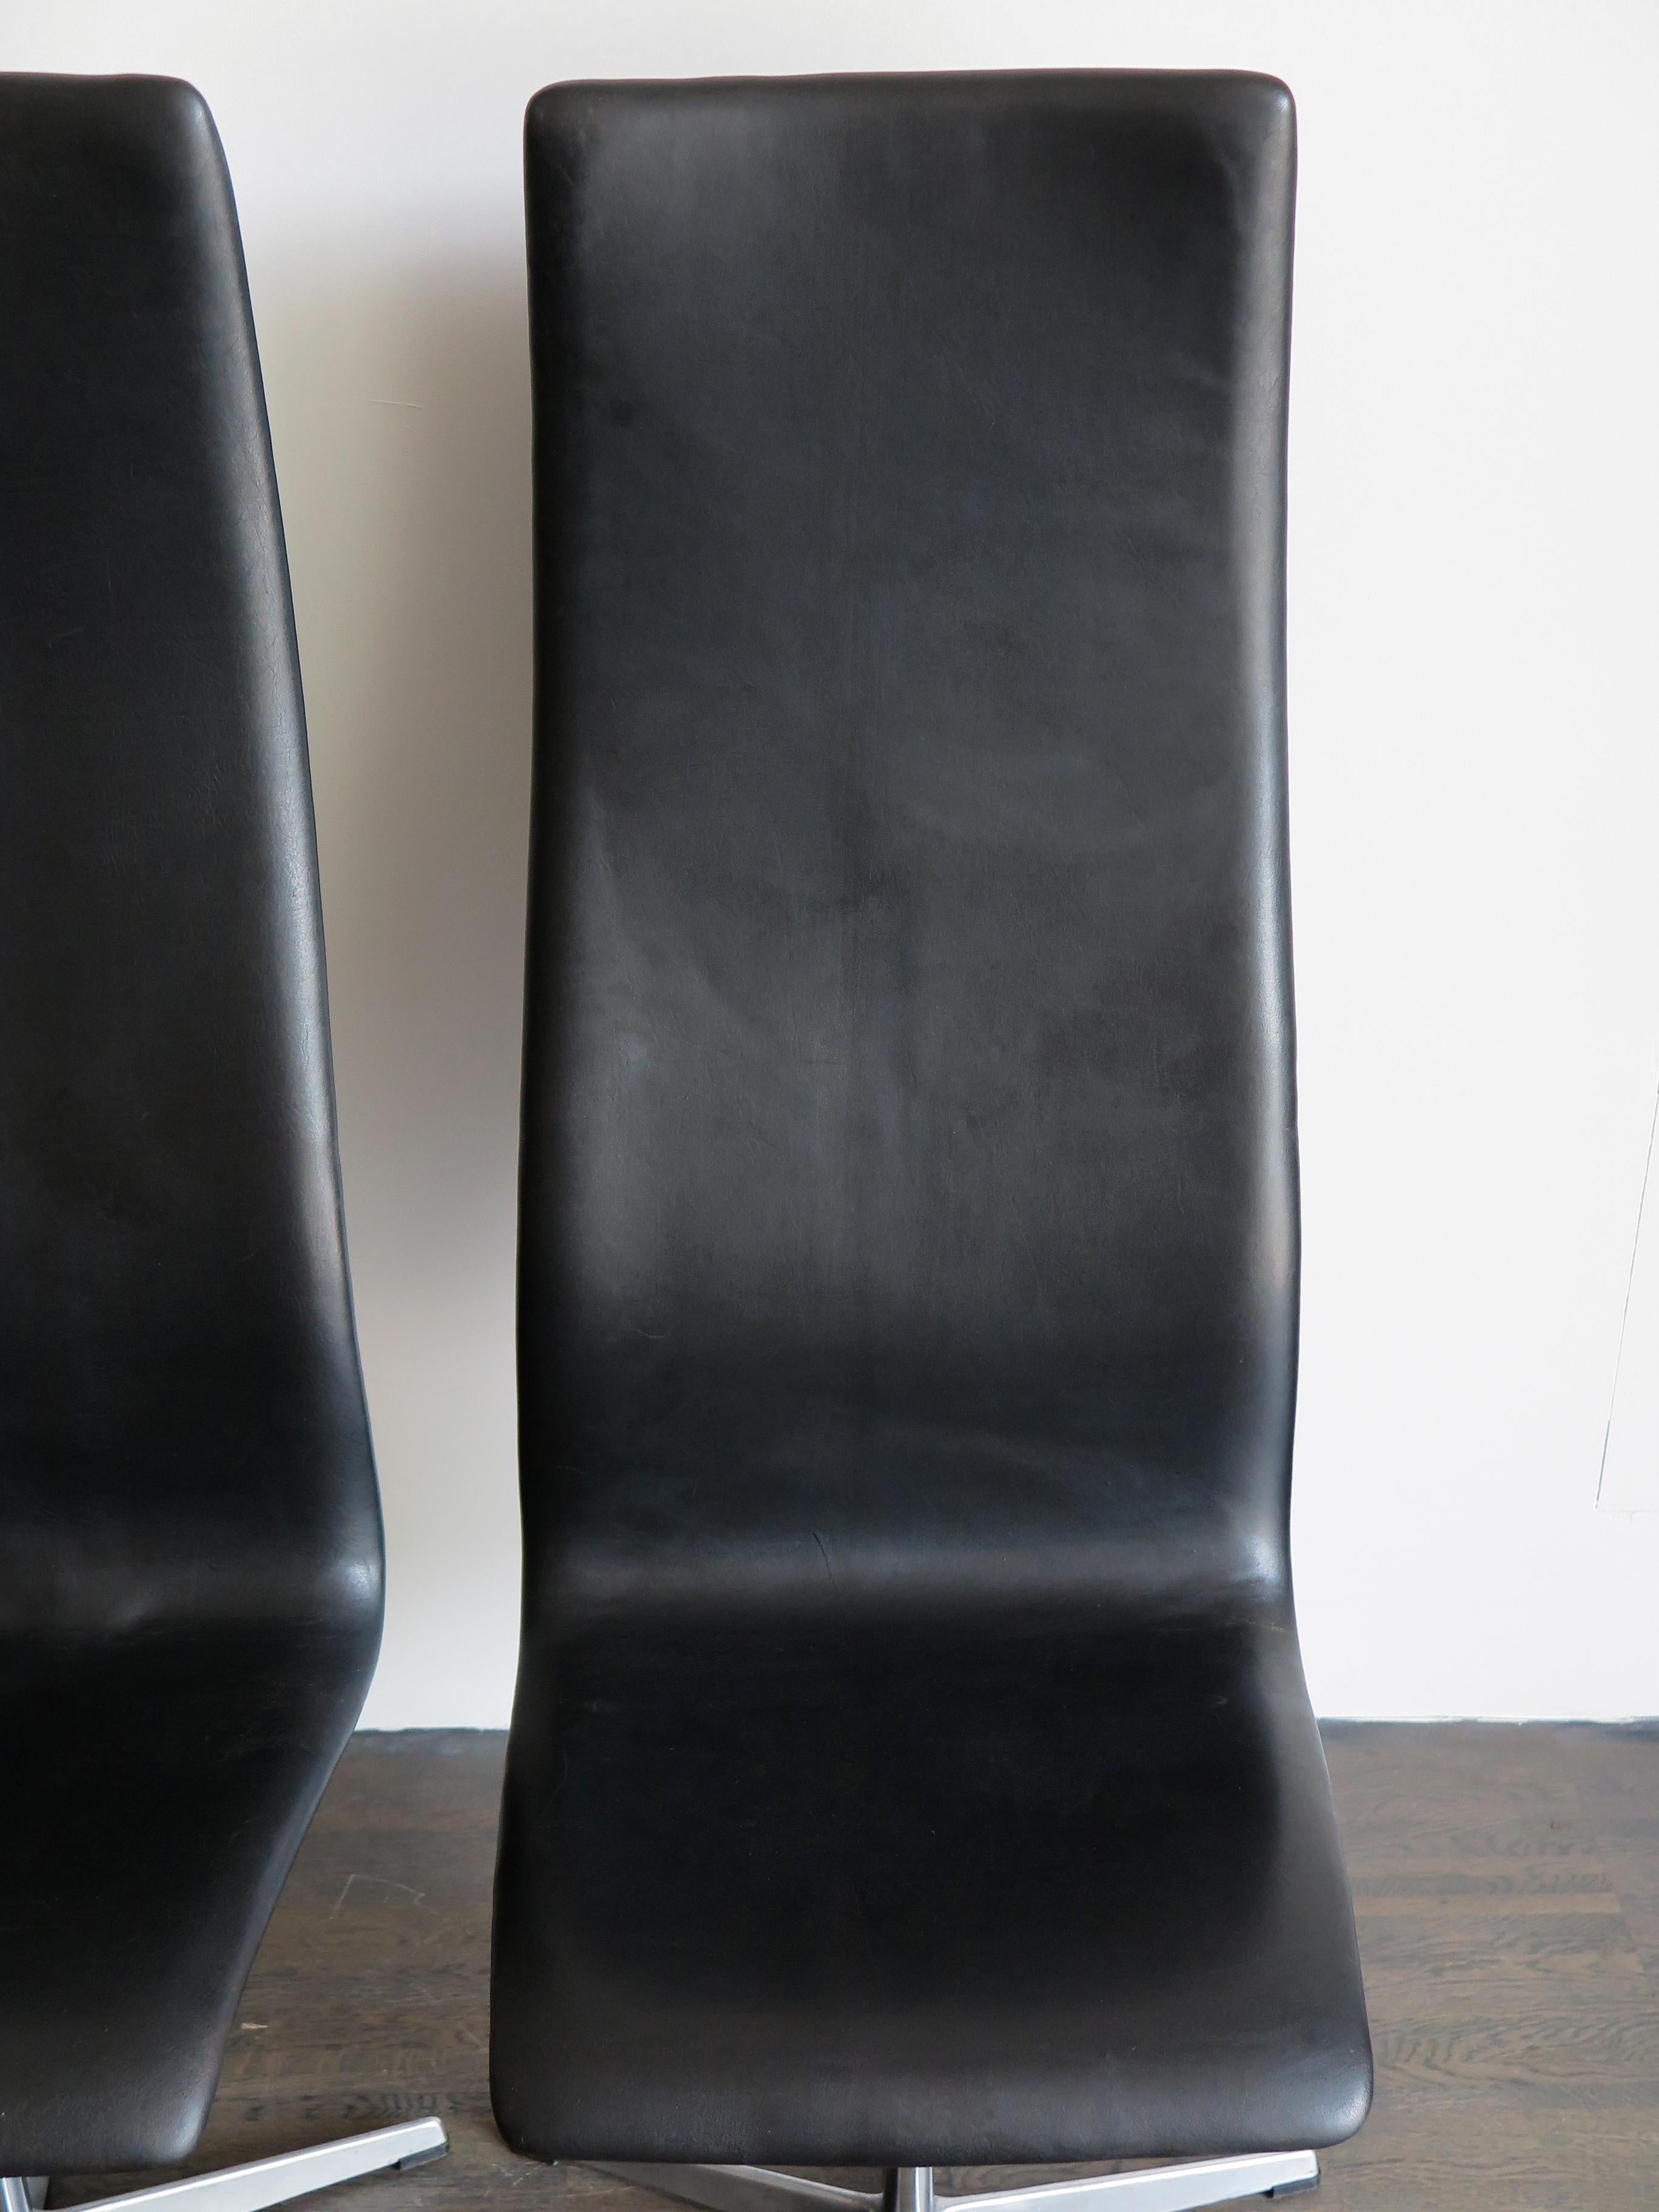 Oxford Midcentury Black Leather Chairs by Arne Jacobsen for Fritz Hansen, 1960s For Sale 1